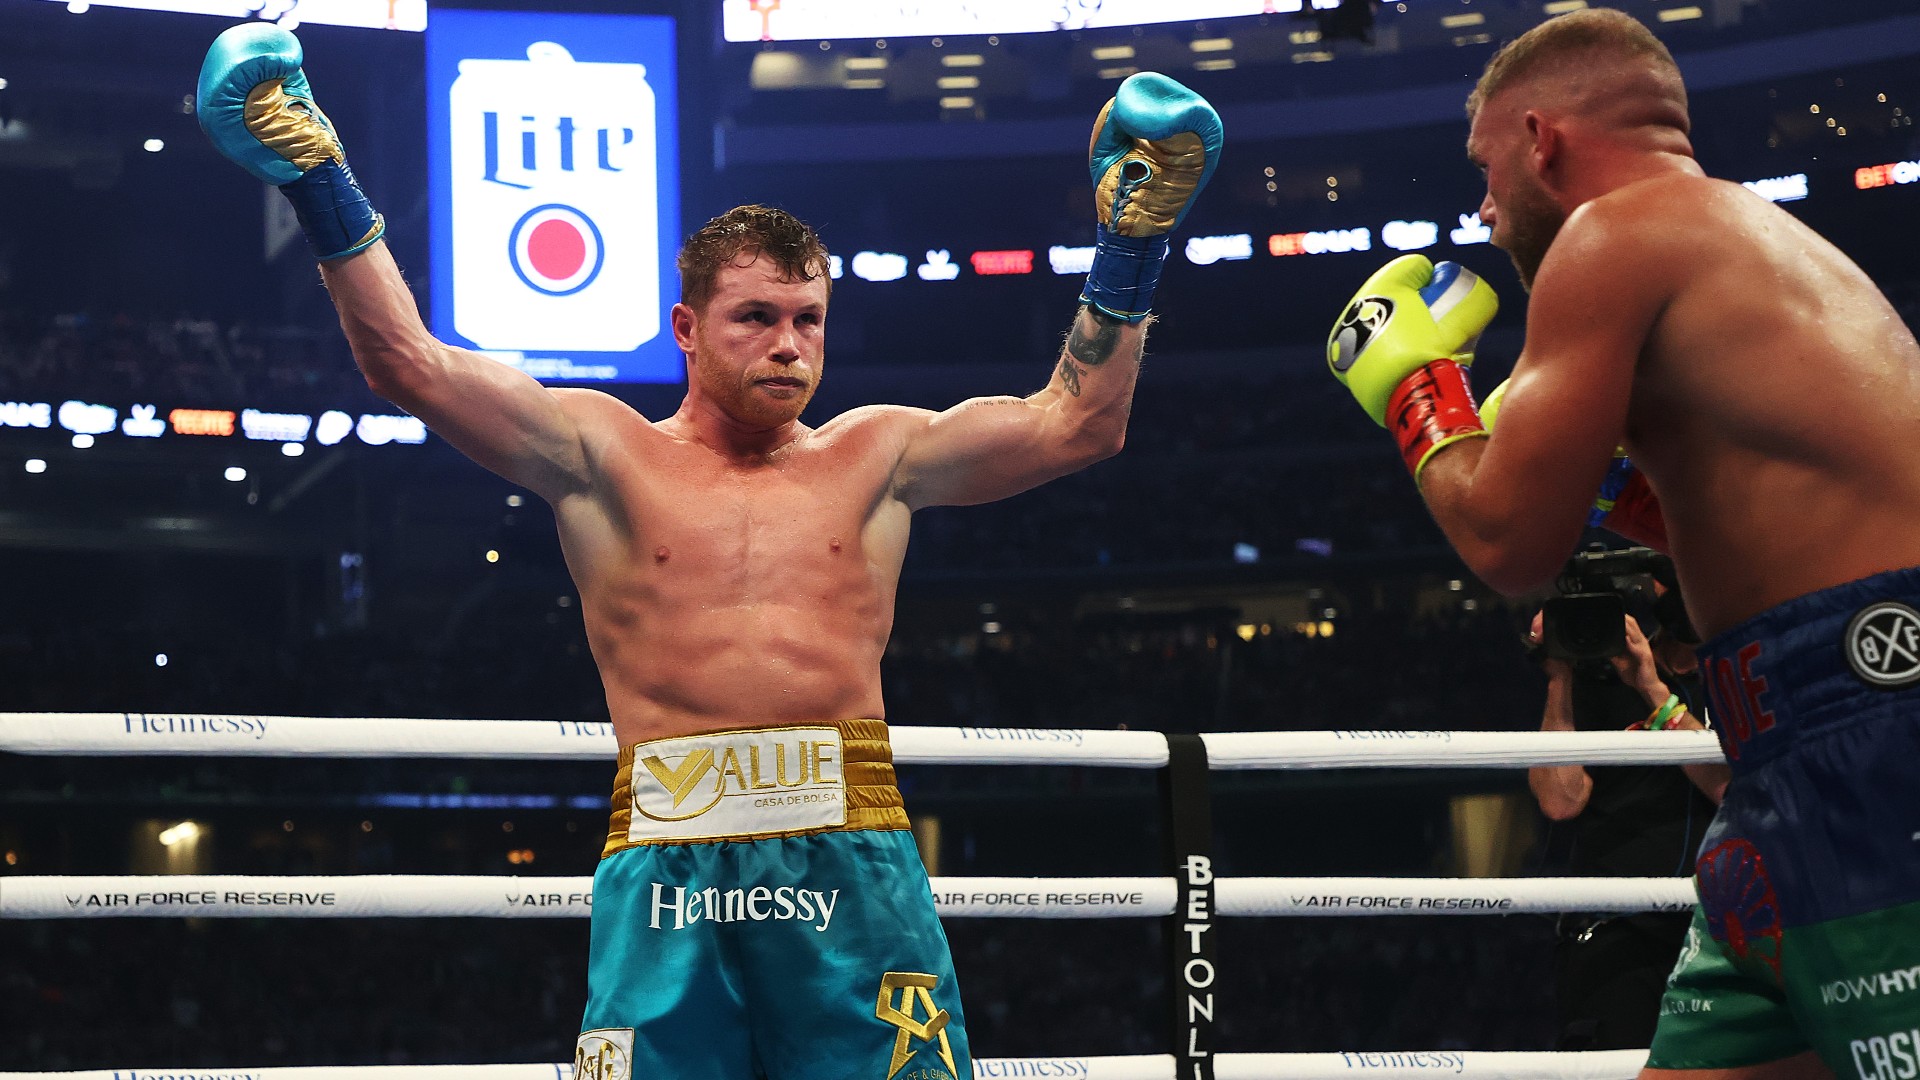 Canelo vs. Saunders result: Canelo breaks down Saunders, forces him to quit after 8th round